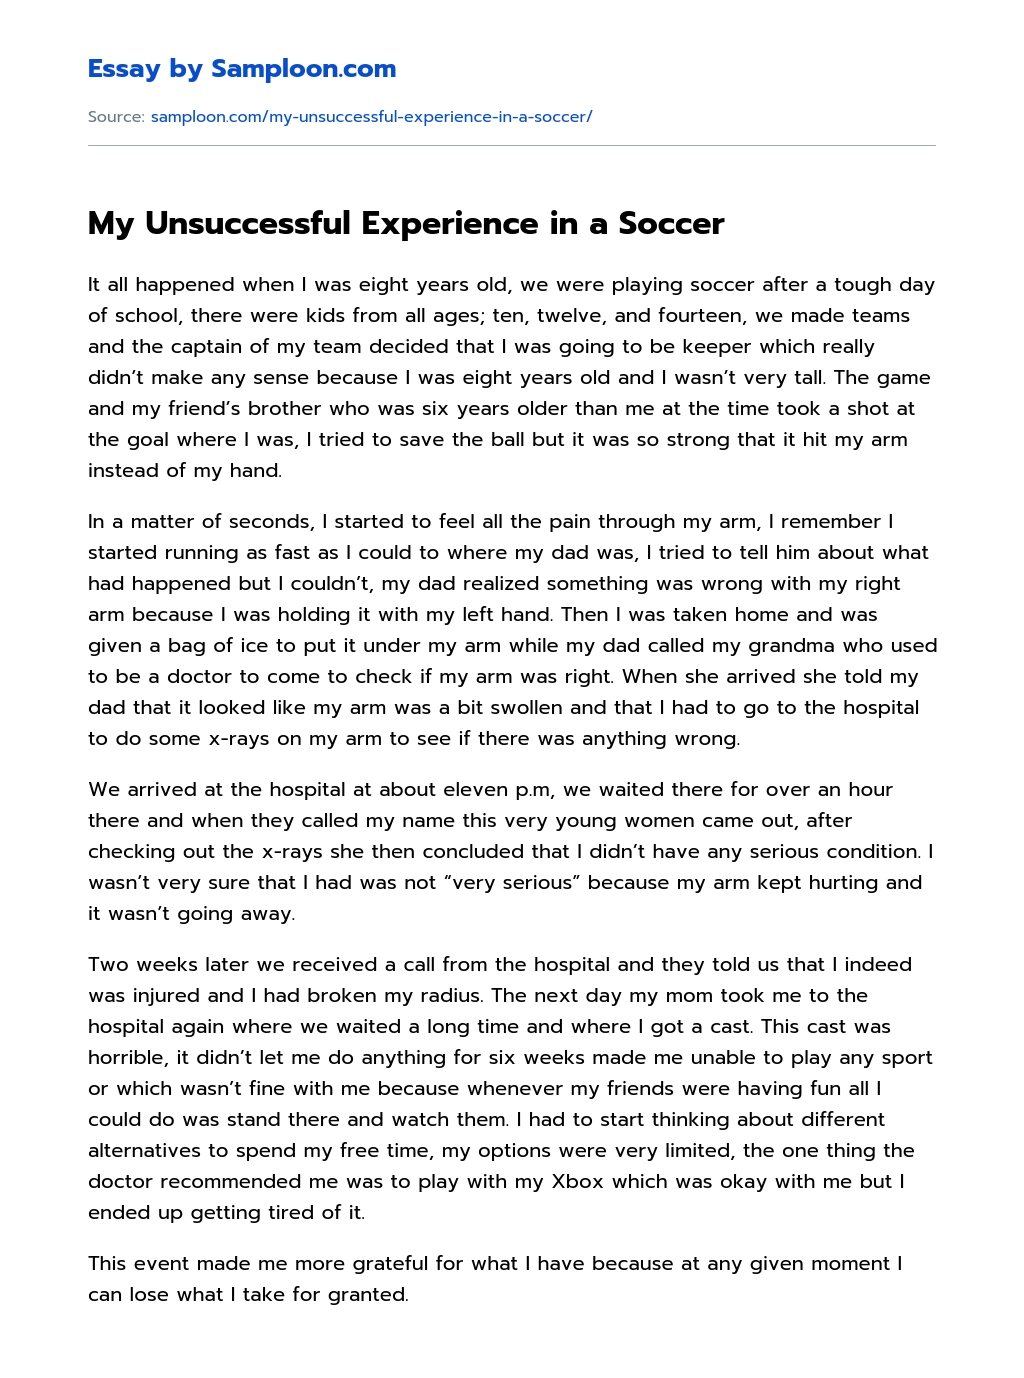 My Unsuccessful Experience in a Soccer essay